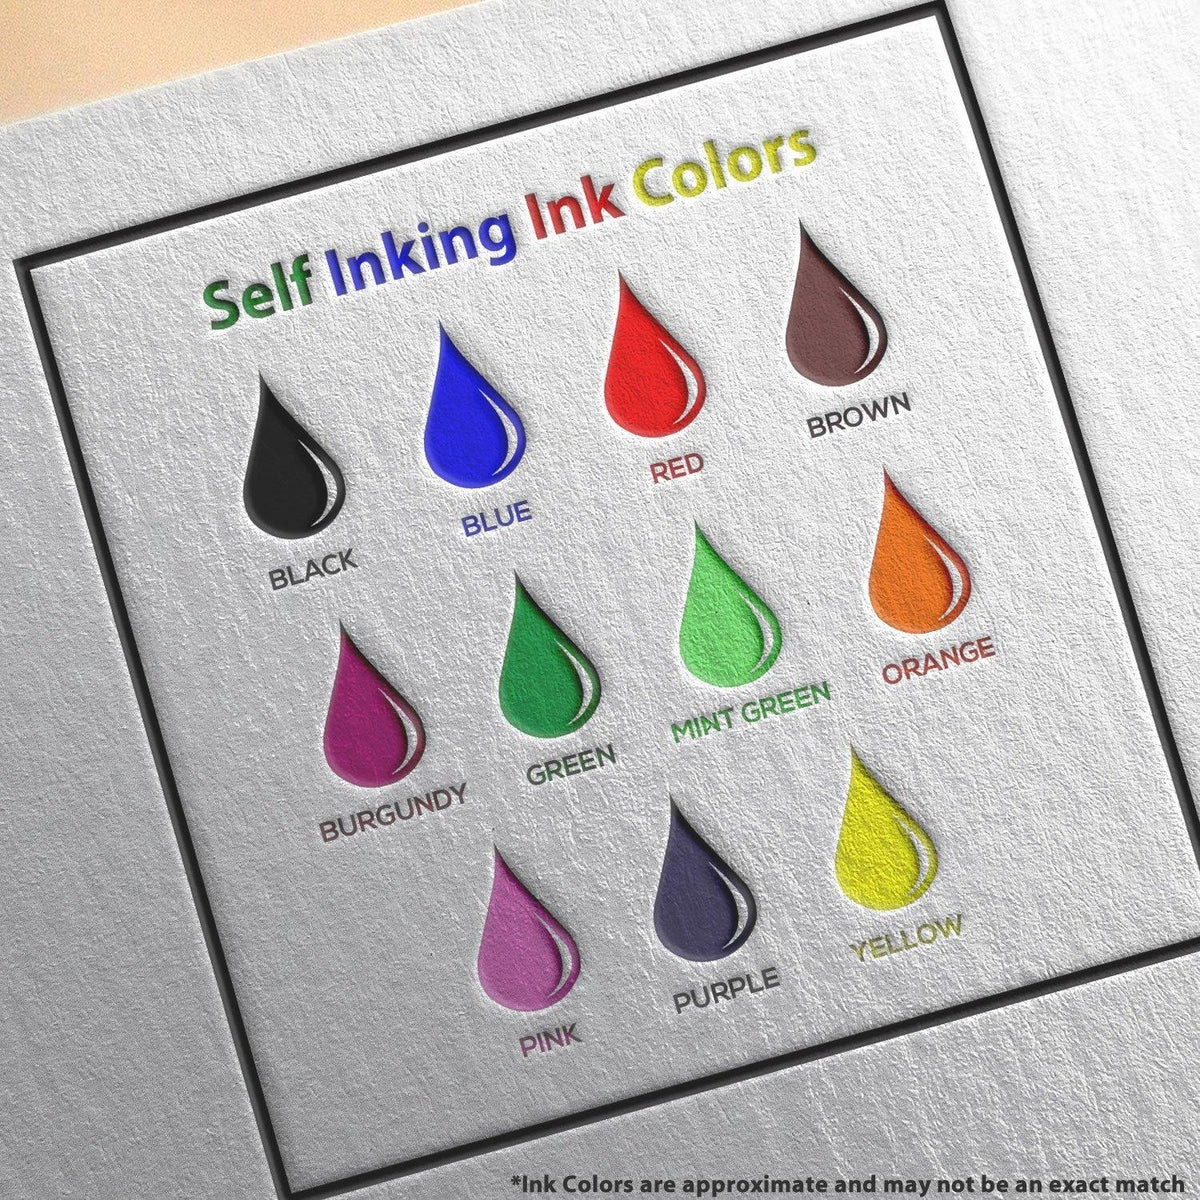 Self-Inking Bold Physical Due Stamp - Engineer Seal Stamps - Brand_Trodat, Impression Size_Small, Stamp Type_Self-Inking Stamp, Type of Use_Business, Type of Use_Medical Office